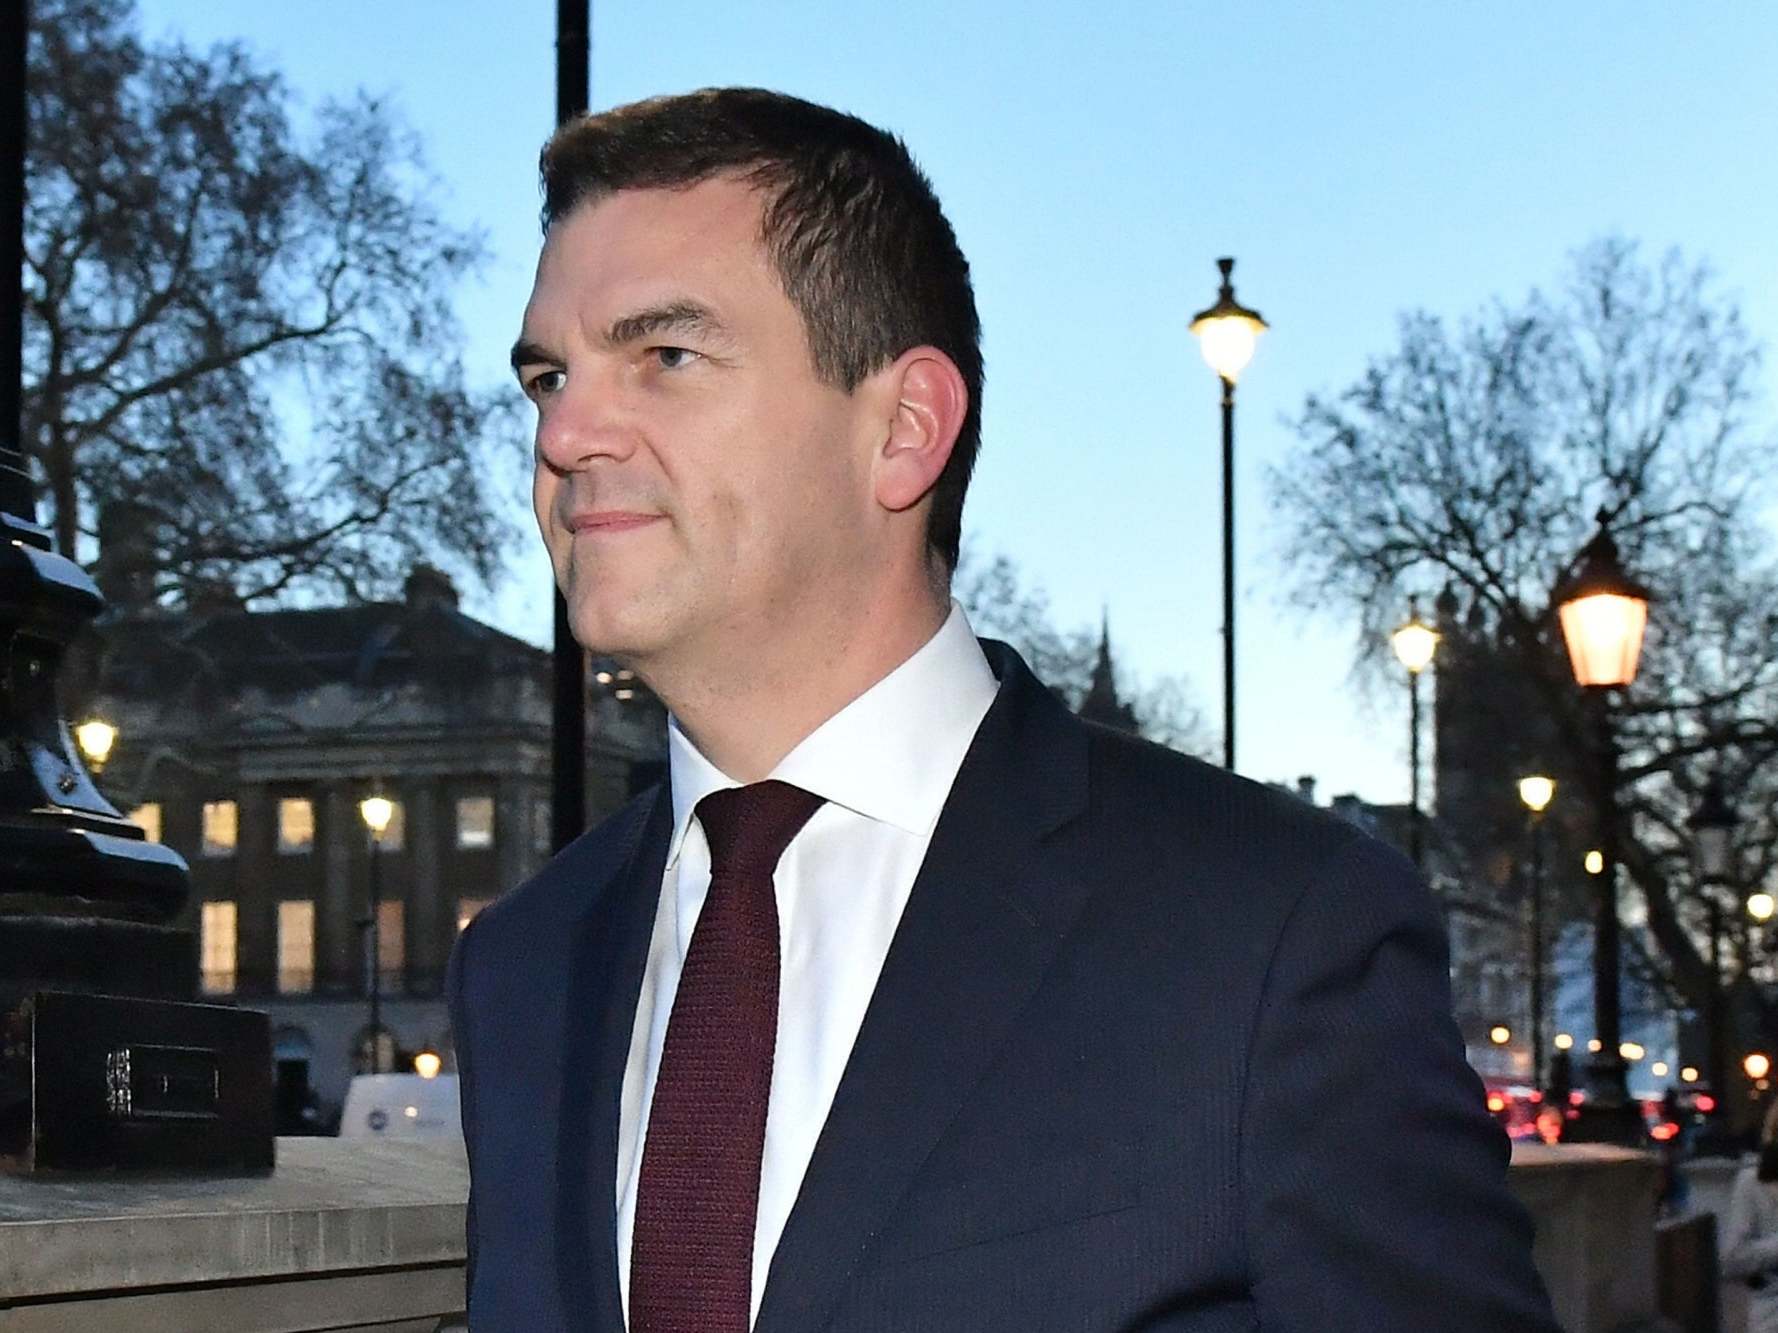 Olly Robbins is widely distrusted by Brexiteers